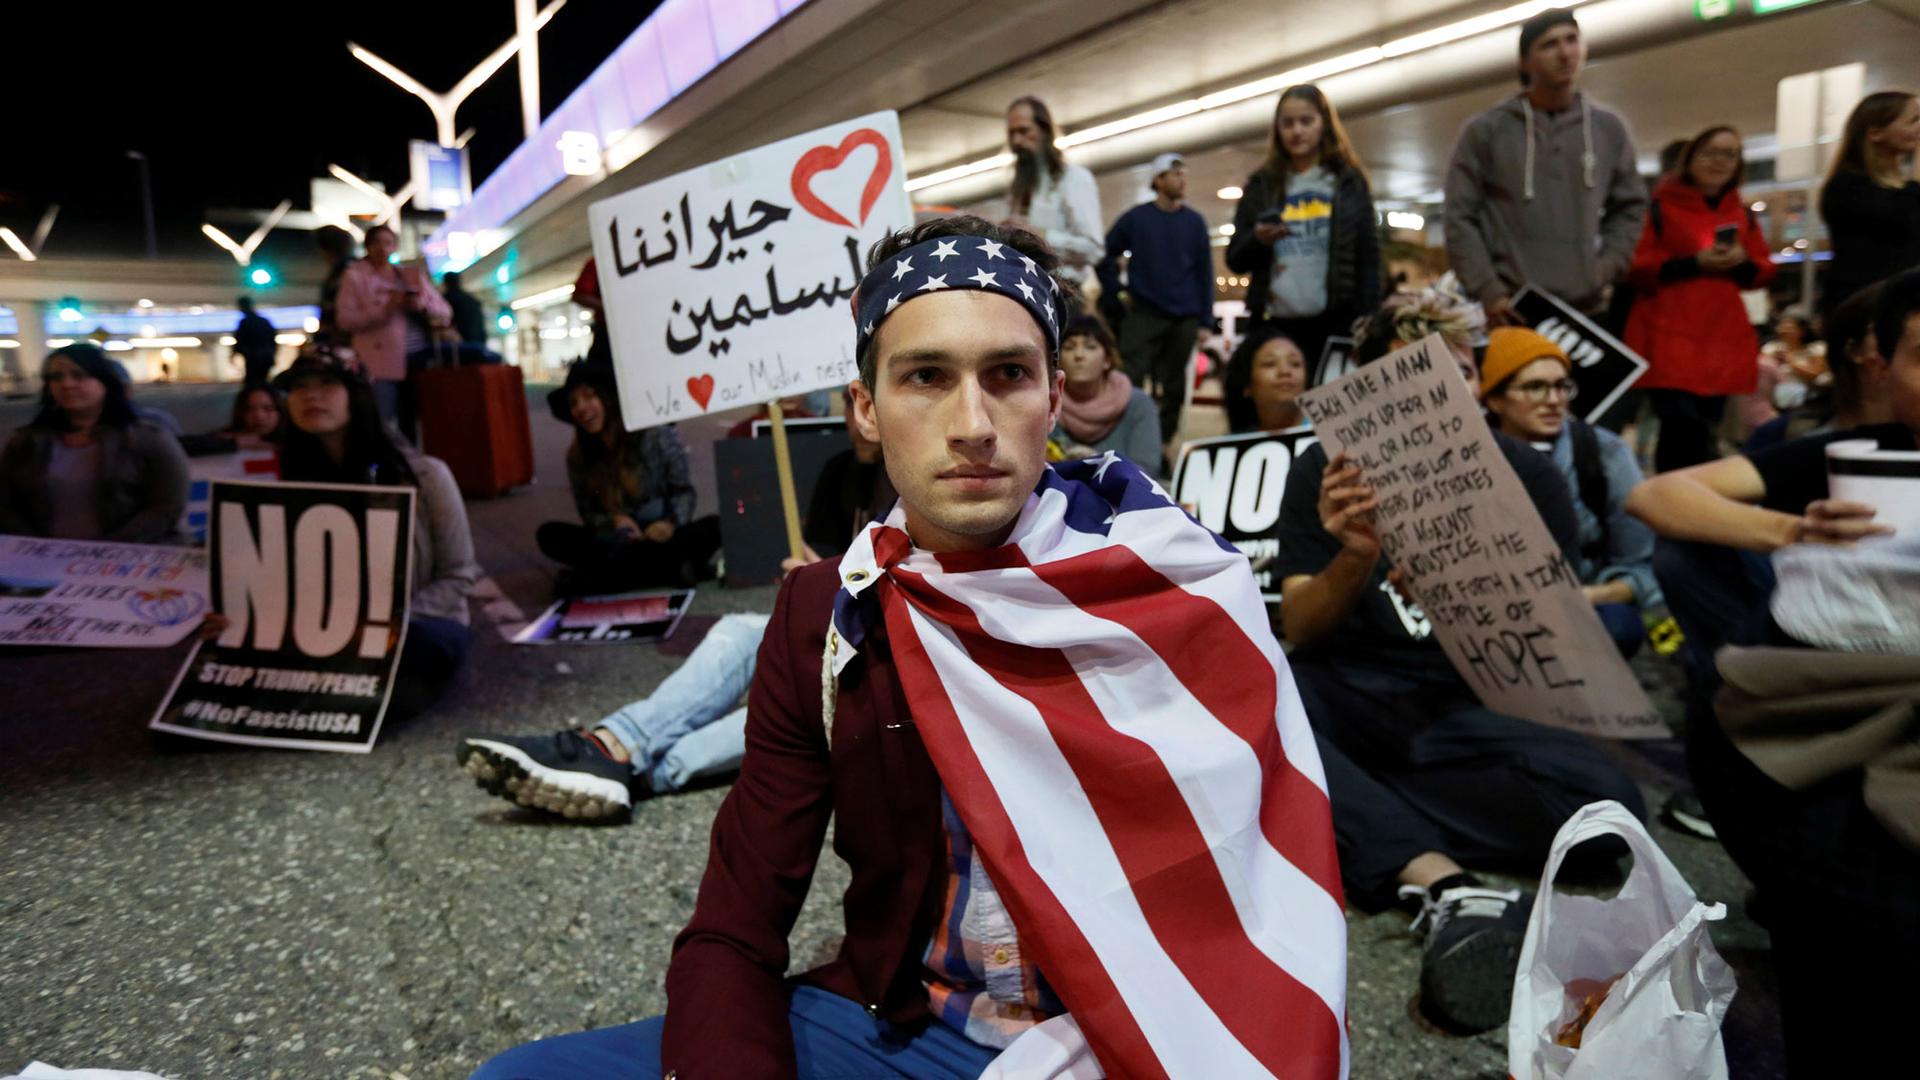 Demonstrators shut down the traffic loops at LAX International Airport and yell slogans during a protest against the travel ban imposed by President Donald Trump's executive order.